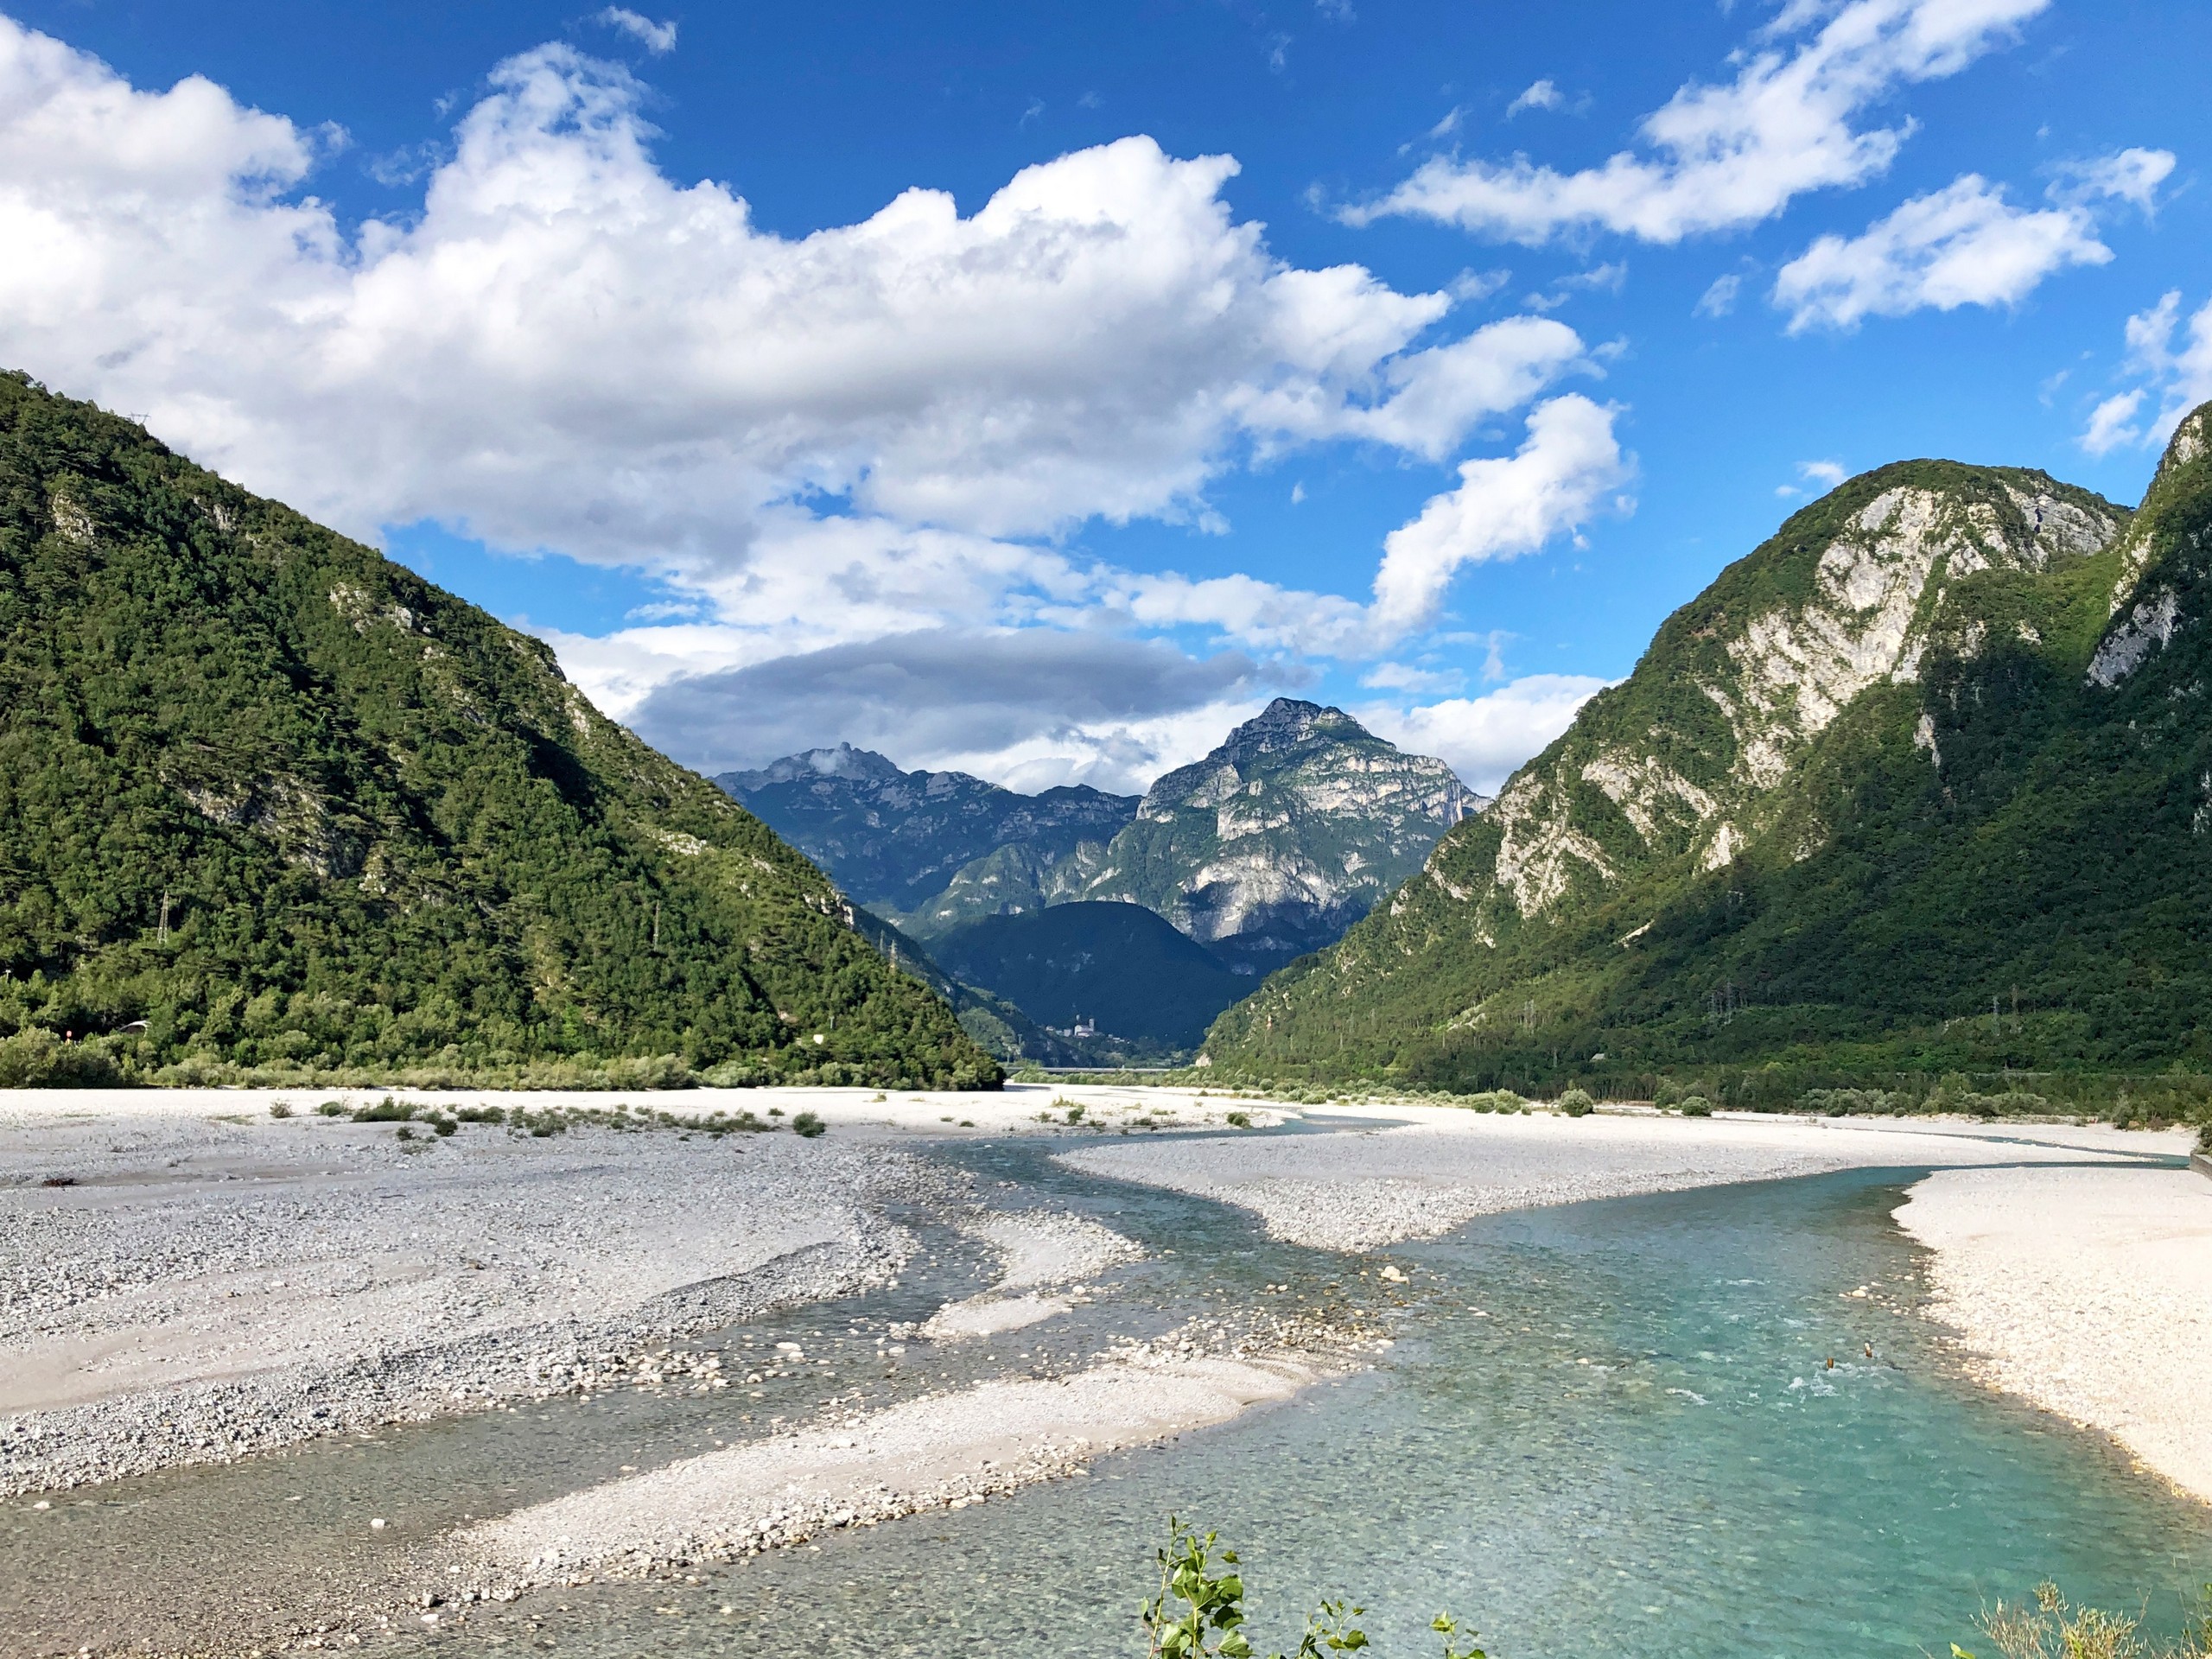 Wide riverbed in Alps, seen while biking on Alpe Adria trail